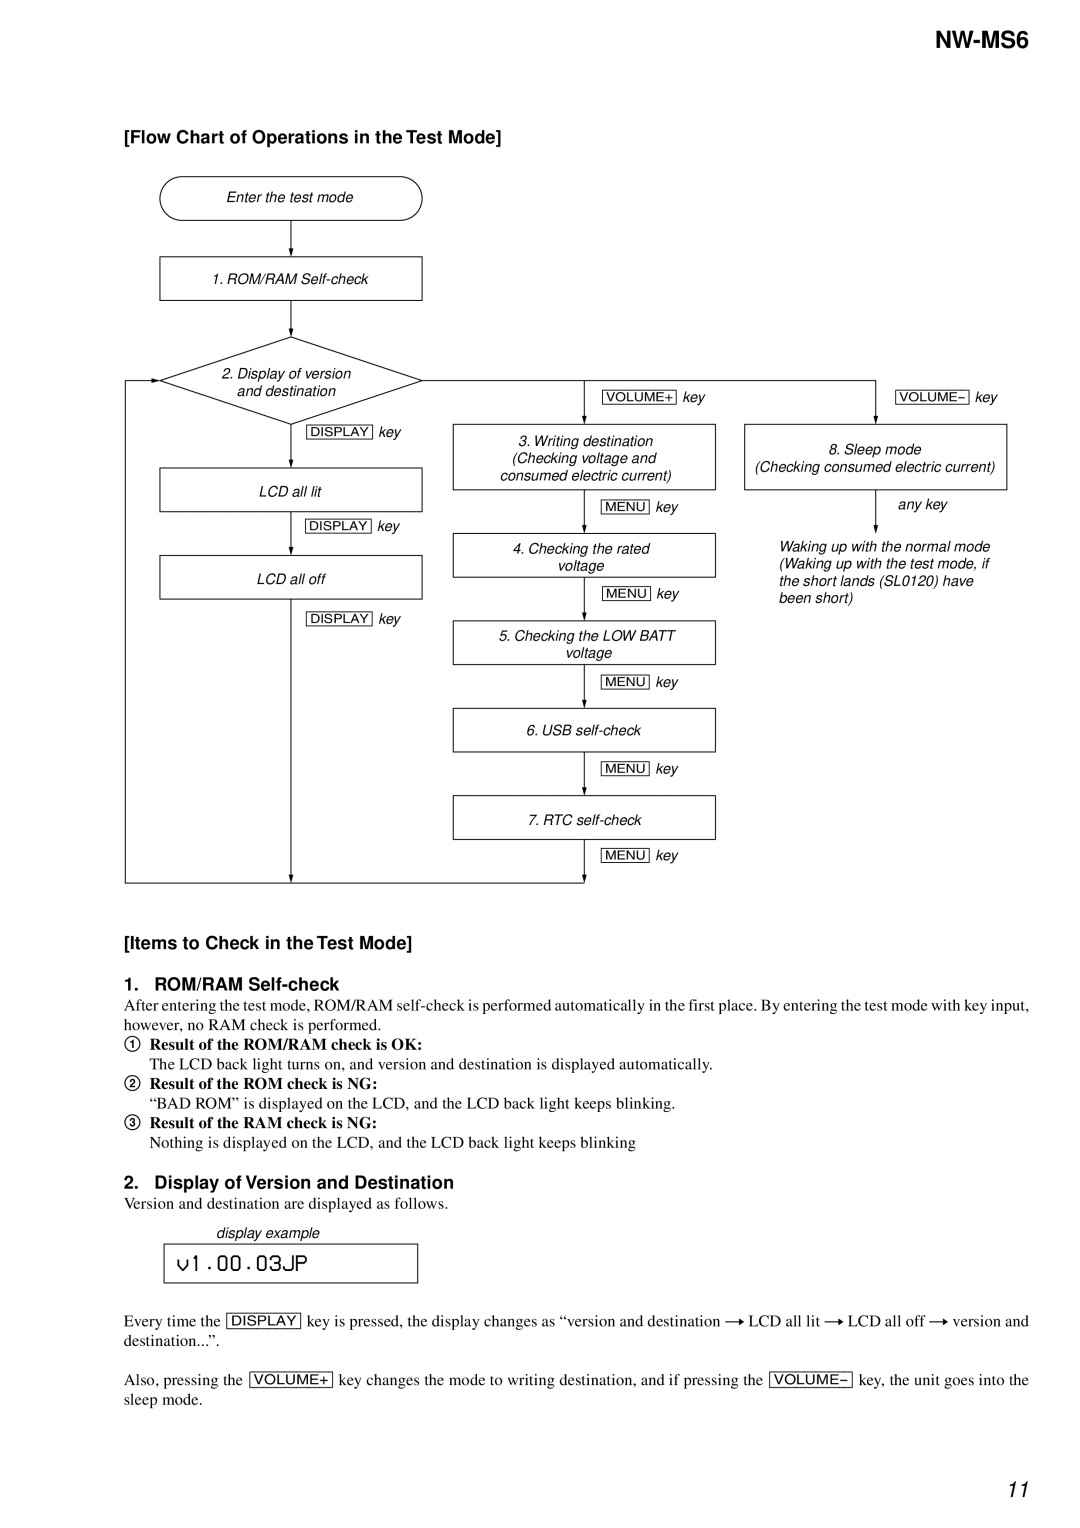 Sony NW-MS6 service manual Flow Chart of Operations in the Test Mode, Items to Check in the Test Mode 1. ROM/RAM Self-check 